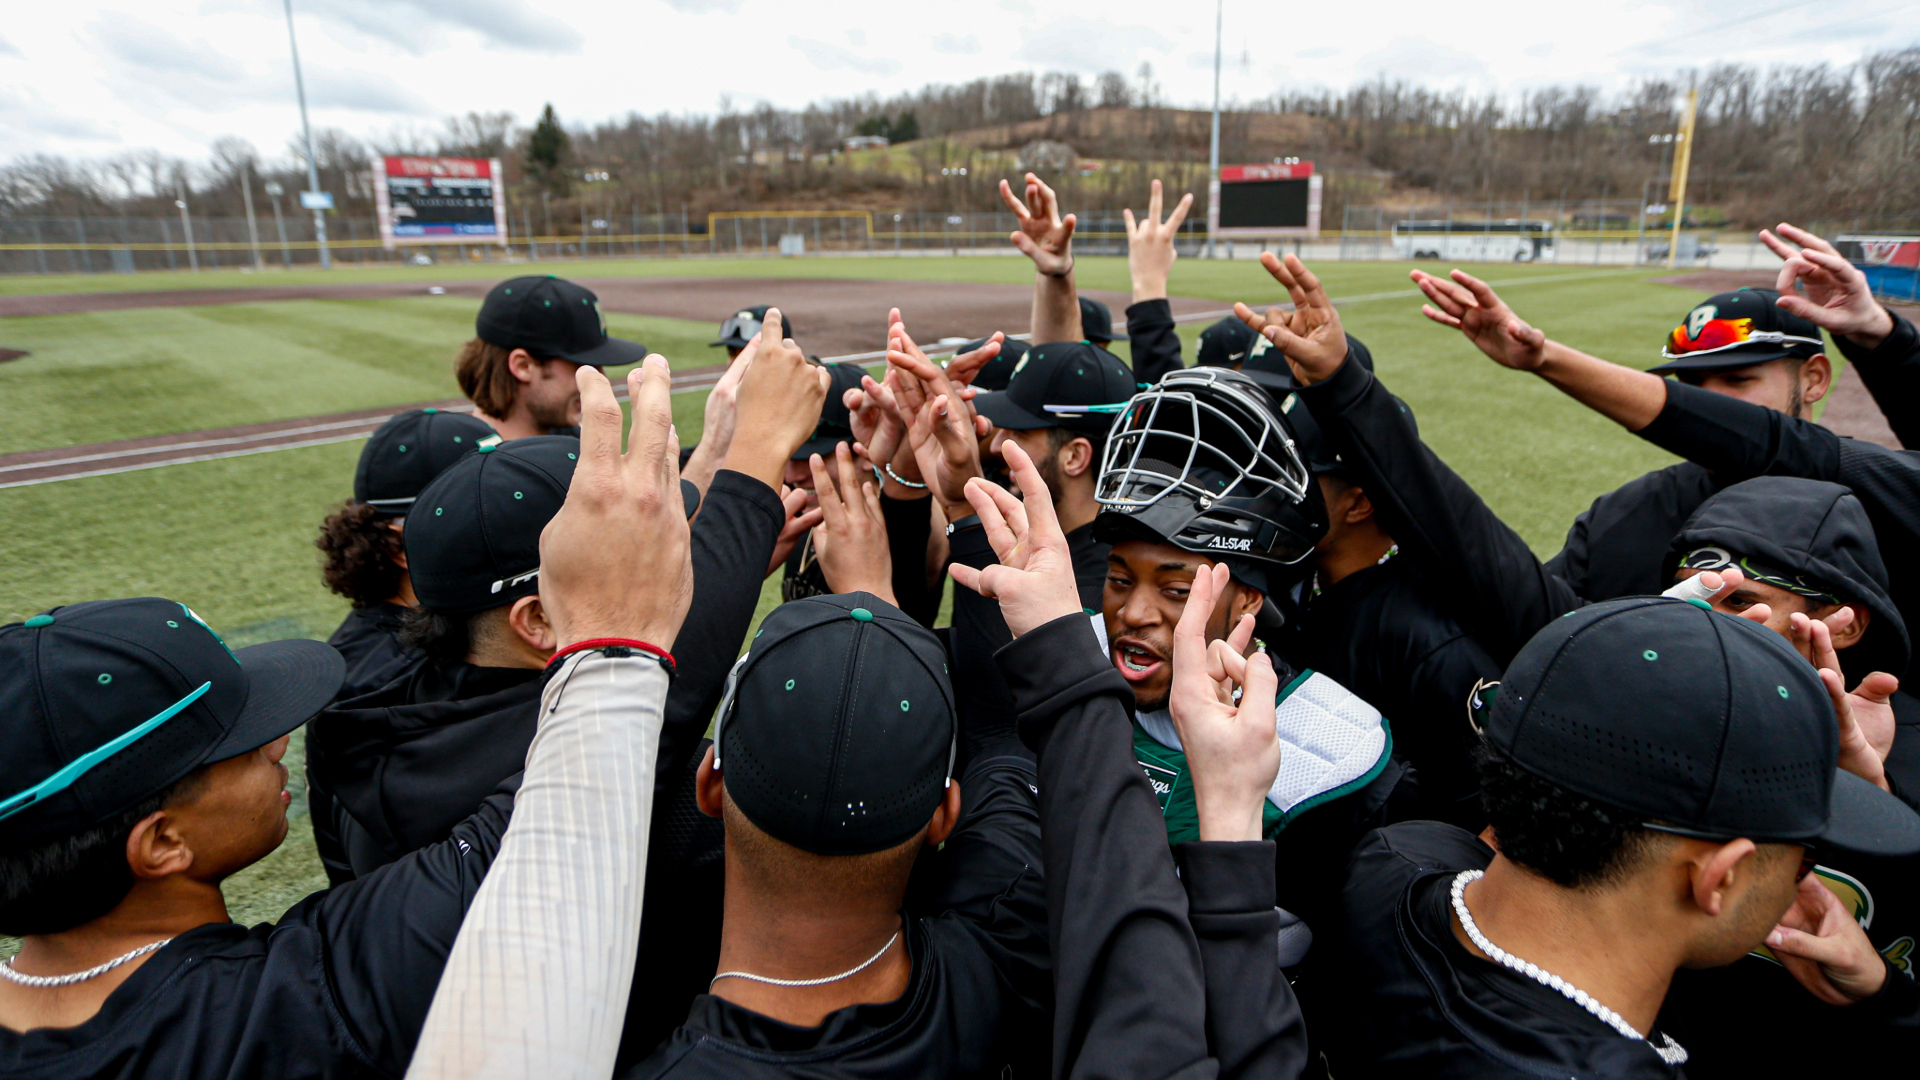 No. 3 Point Park suffered their first loss of the NAIA Baseball National Championship Opening Round on Tuesday against top-seeded Reinhardt.